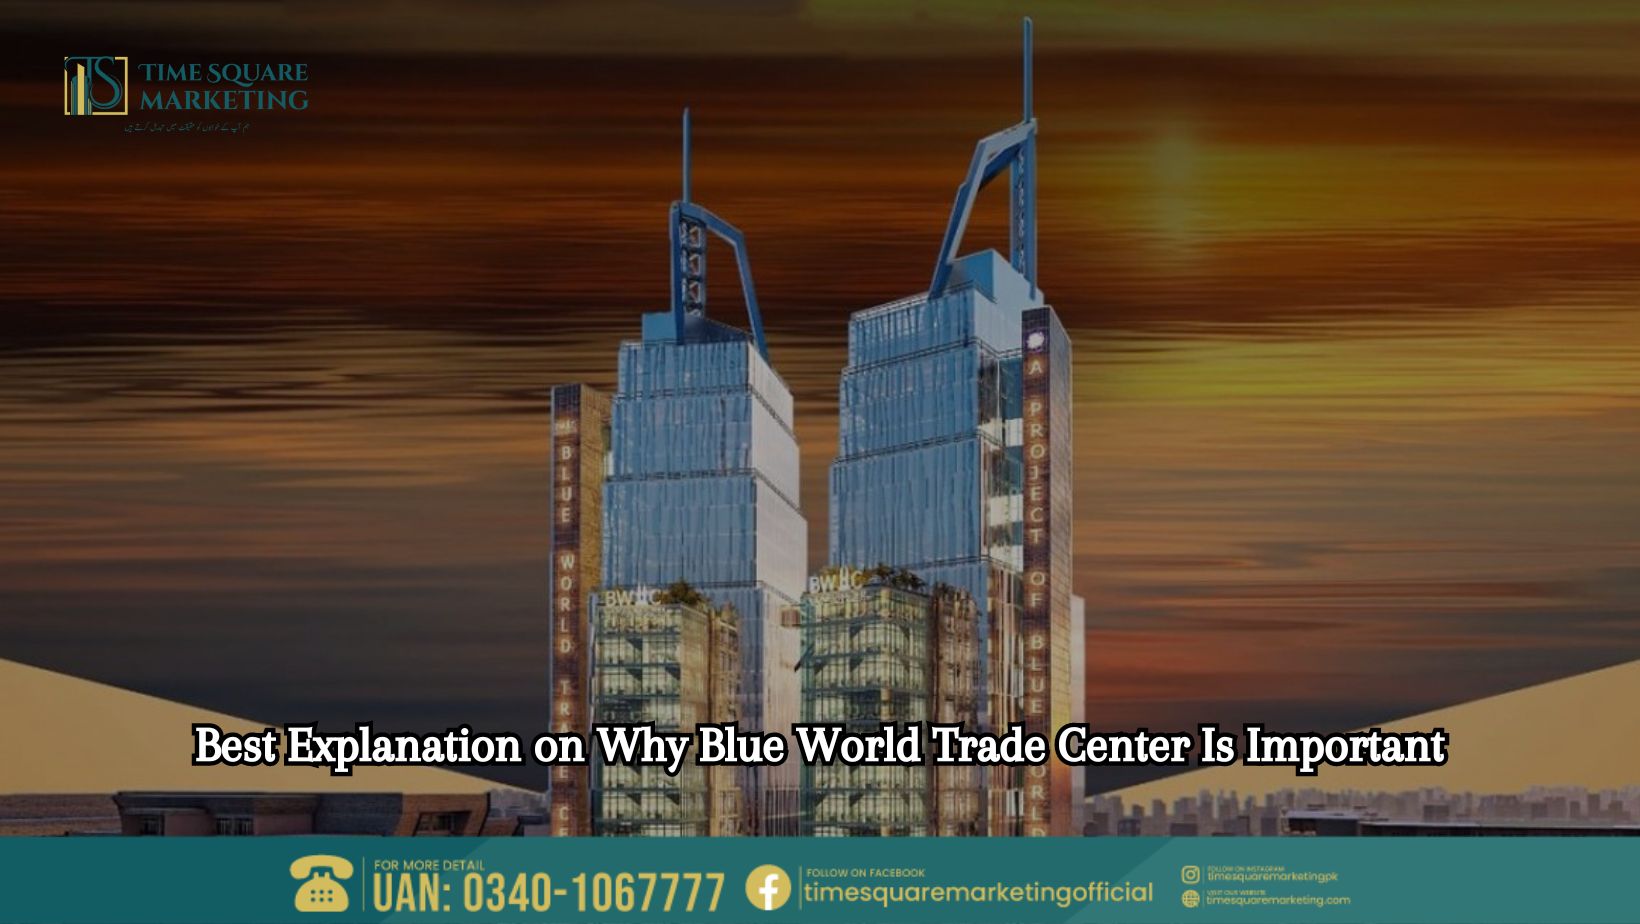 Best Explanation on Why Blue World Trade Center Is Important